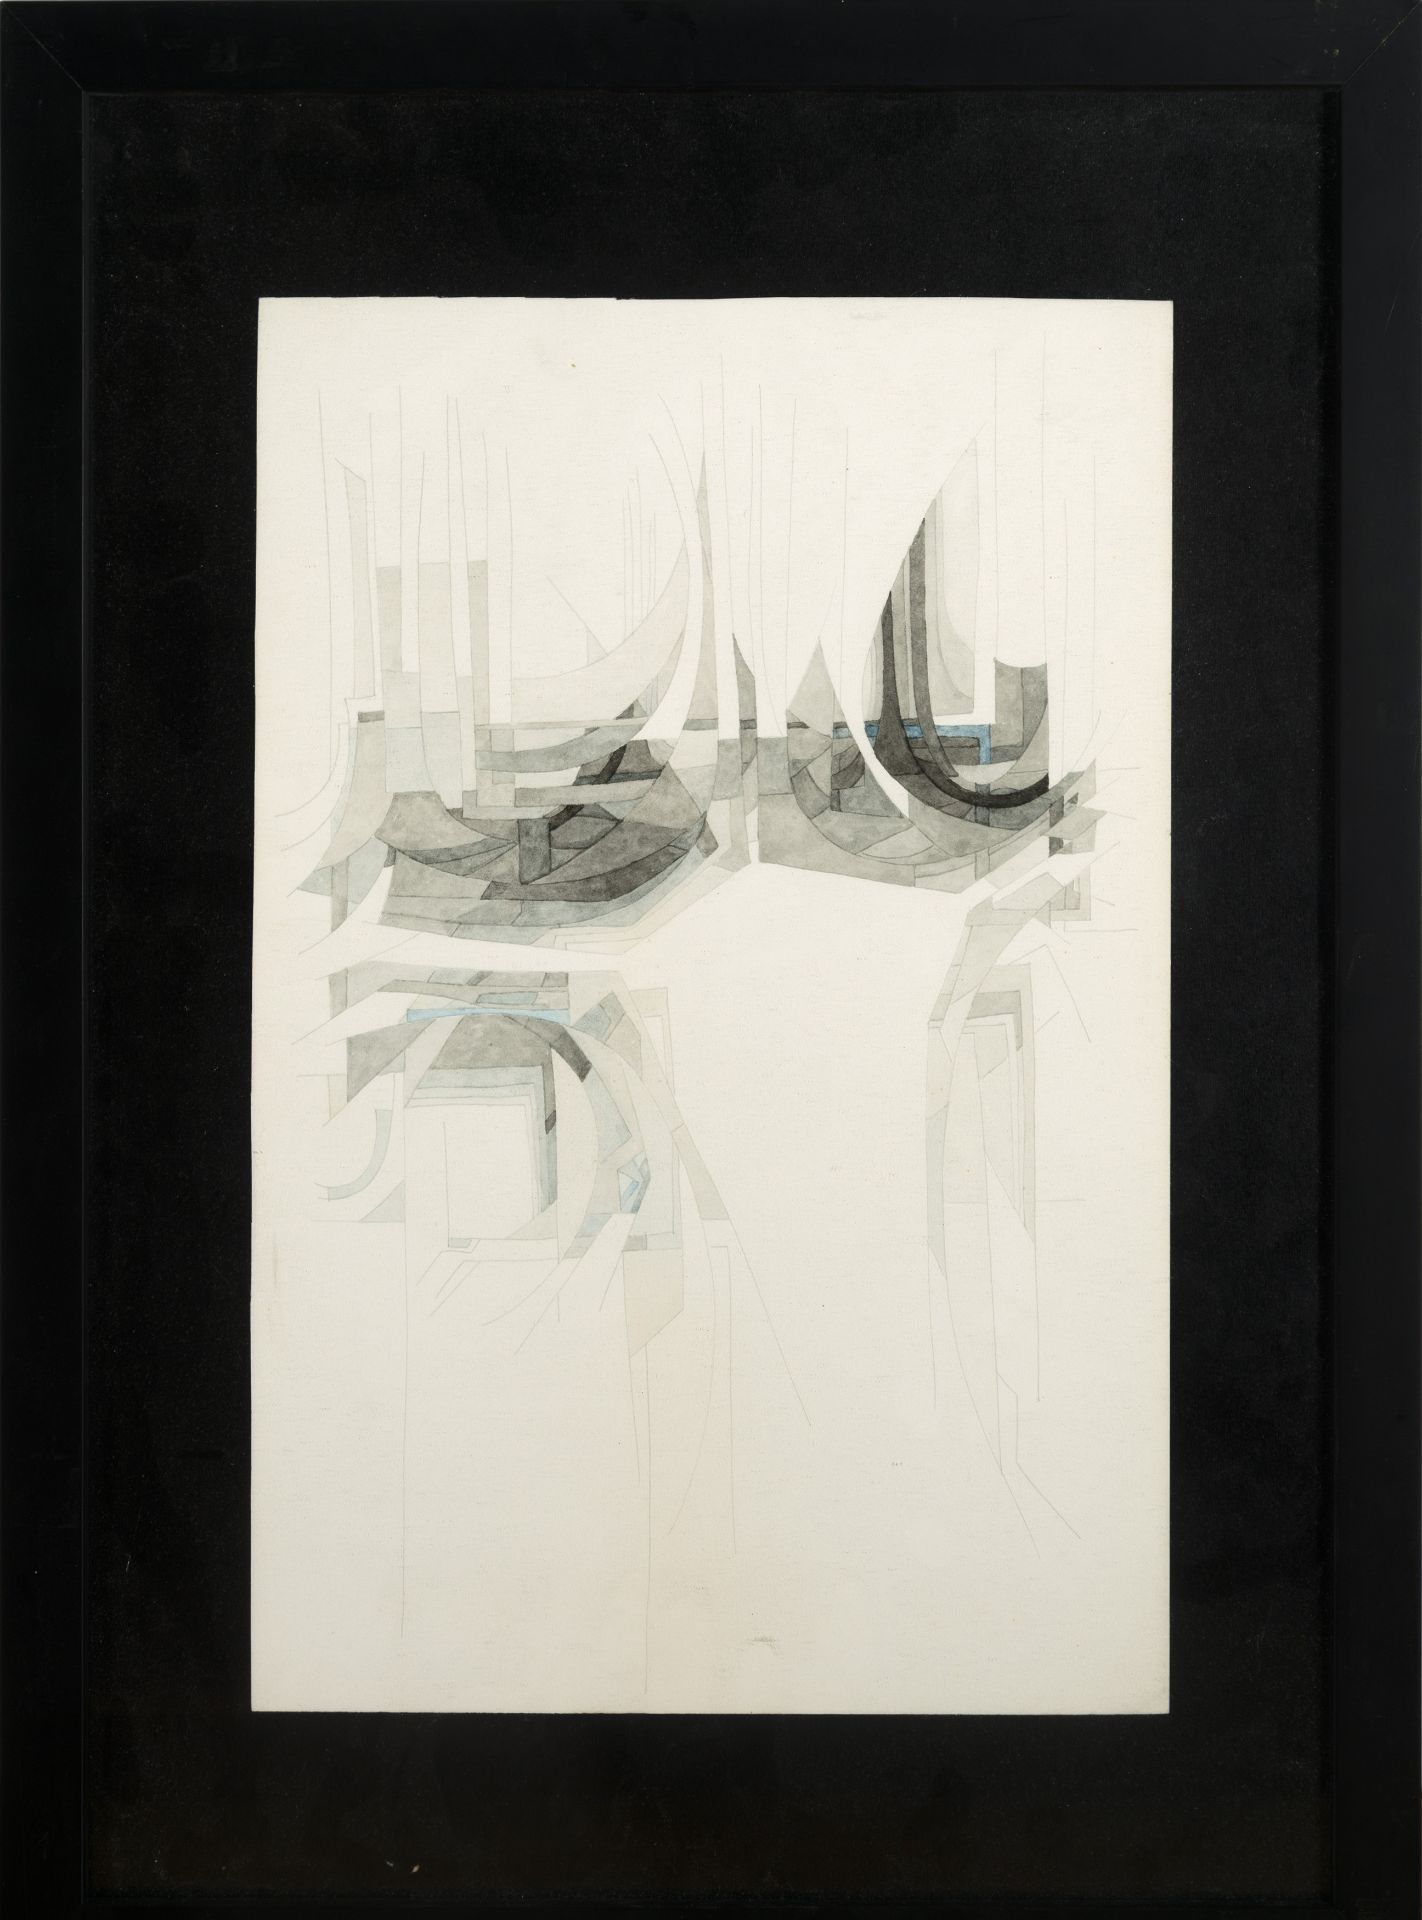 Claret, 1975, charcoal on paper